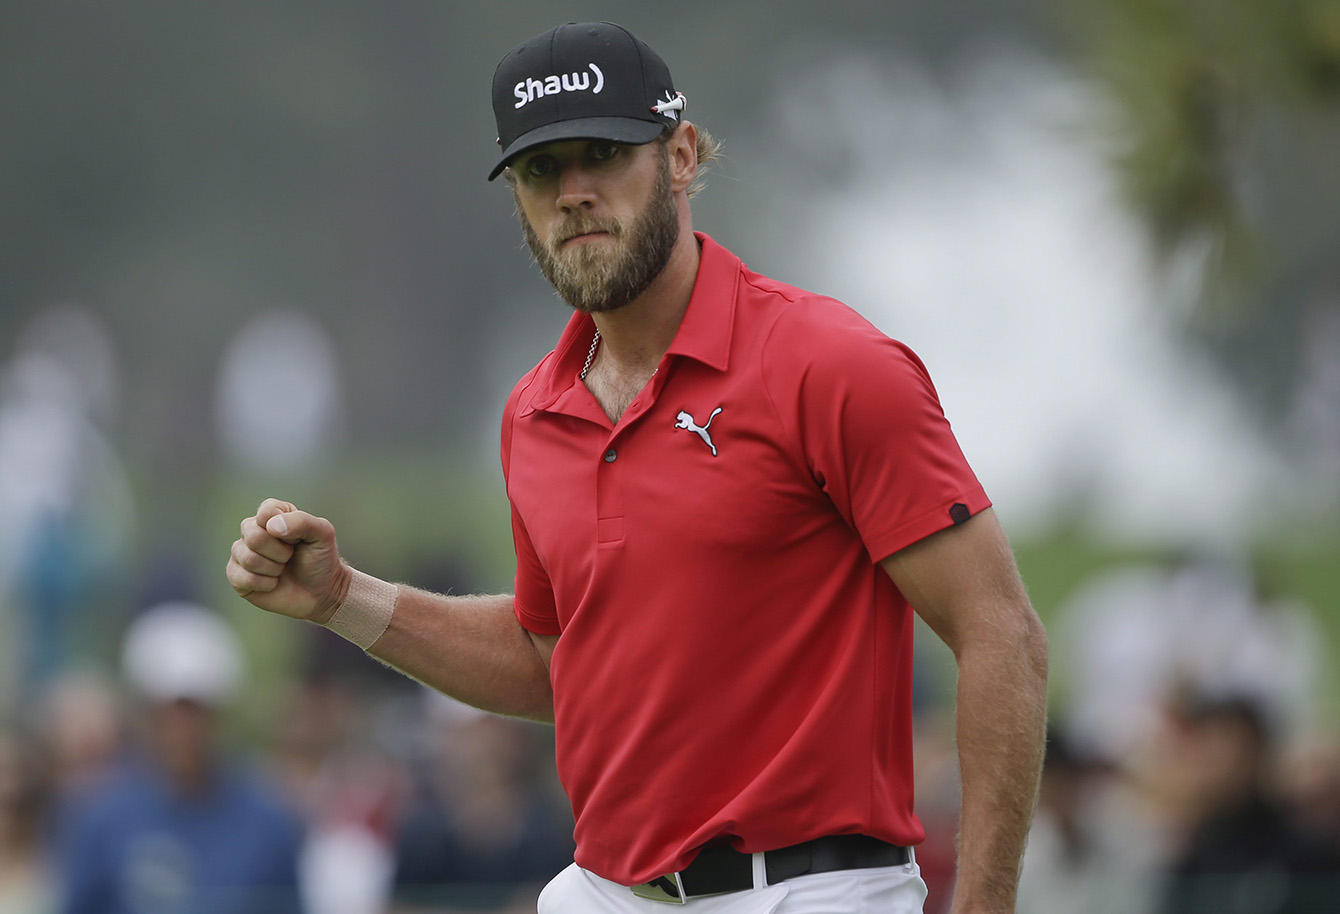 DeLaet reacts after sinking his putt for eagle on the sixth hole of the South Course at Torrey Pines during the final round of the 2014 Farmers Insurance Open.  He finished 2nd.